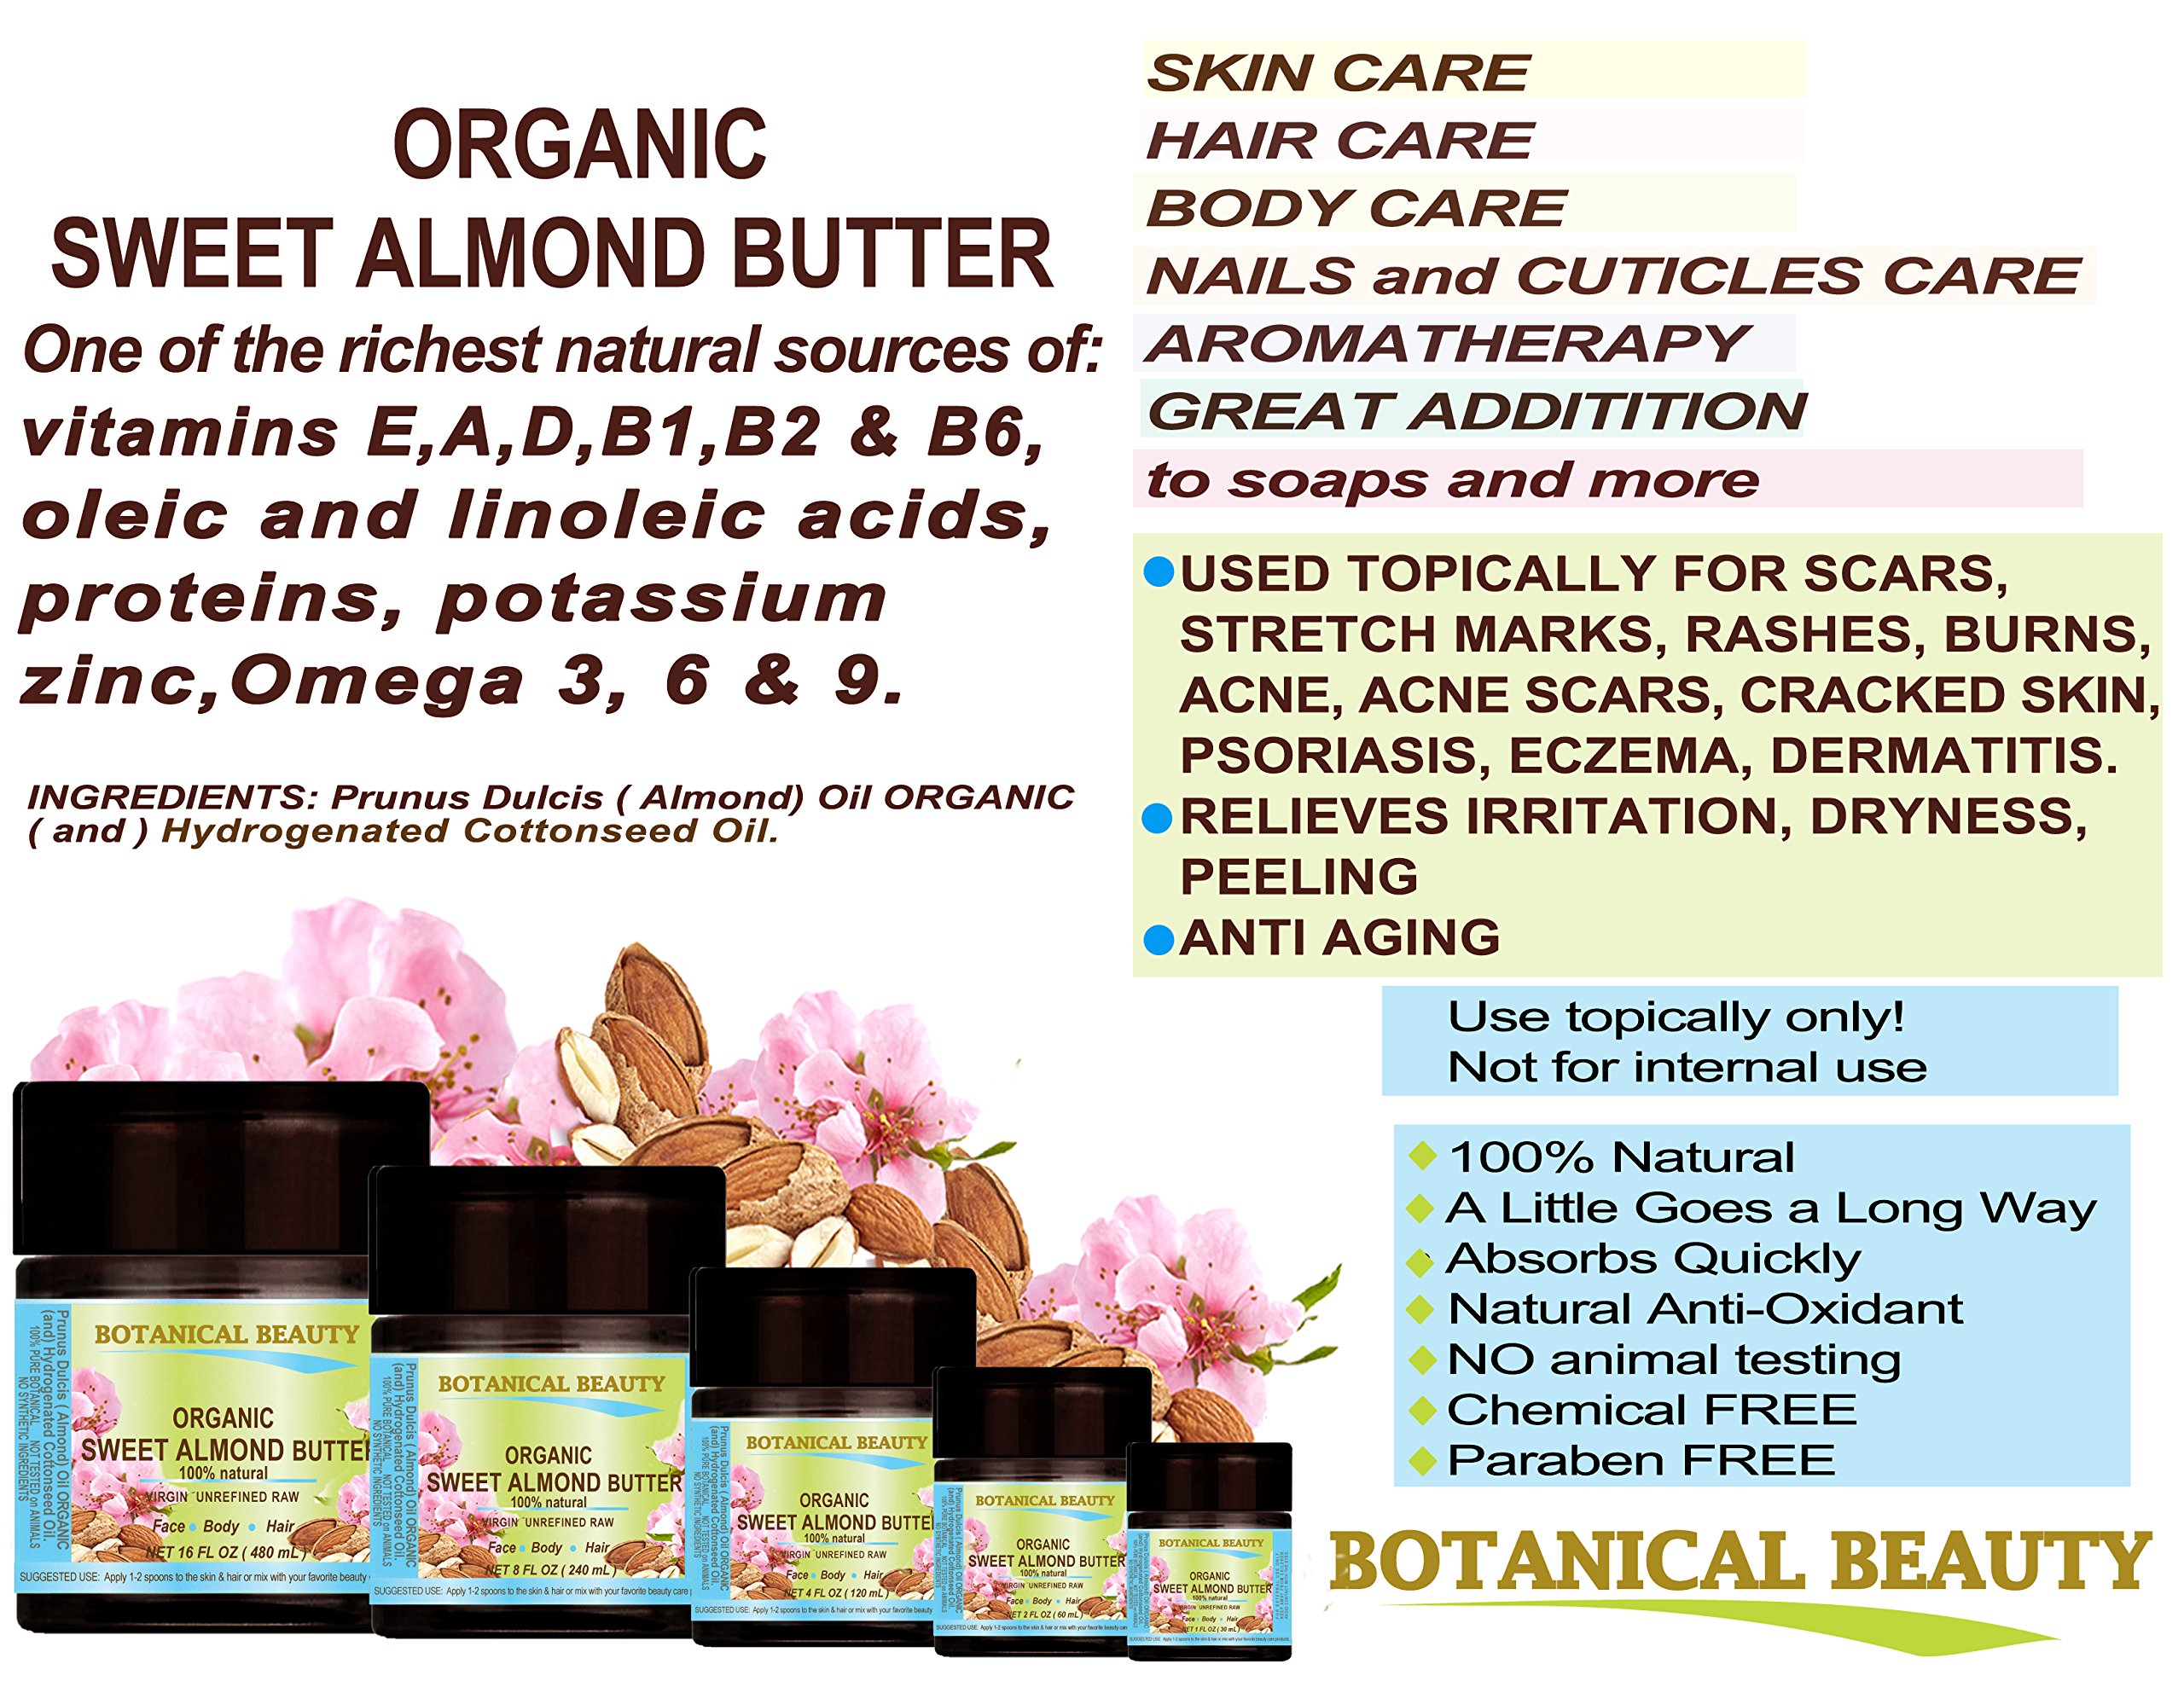 SWEET ALMOND OIL - BUTTER ORGANIC RAW. 100% Natural/VIRGIN/UNREFINED. 16 Fl.oz.- 480 ml. For Skin, Hair and Nail Care.